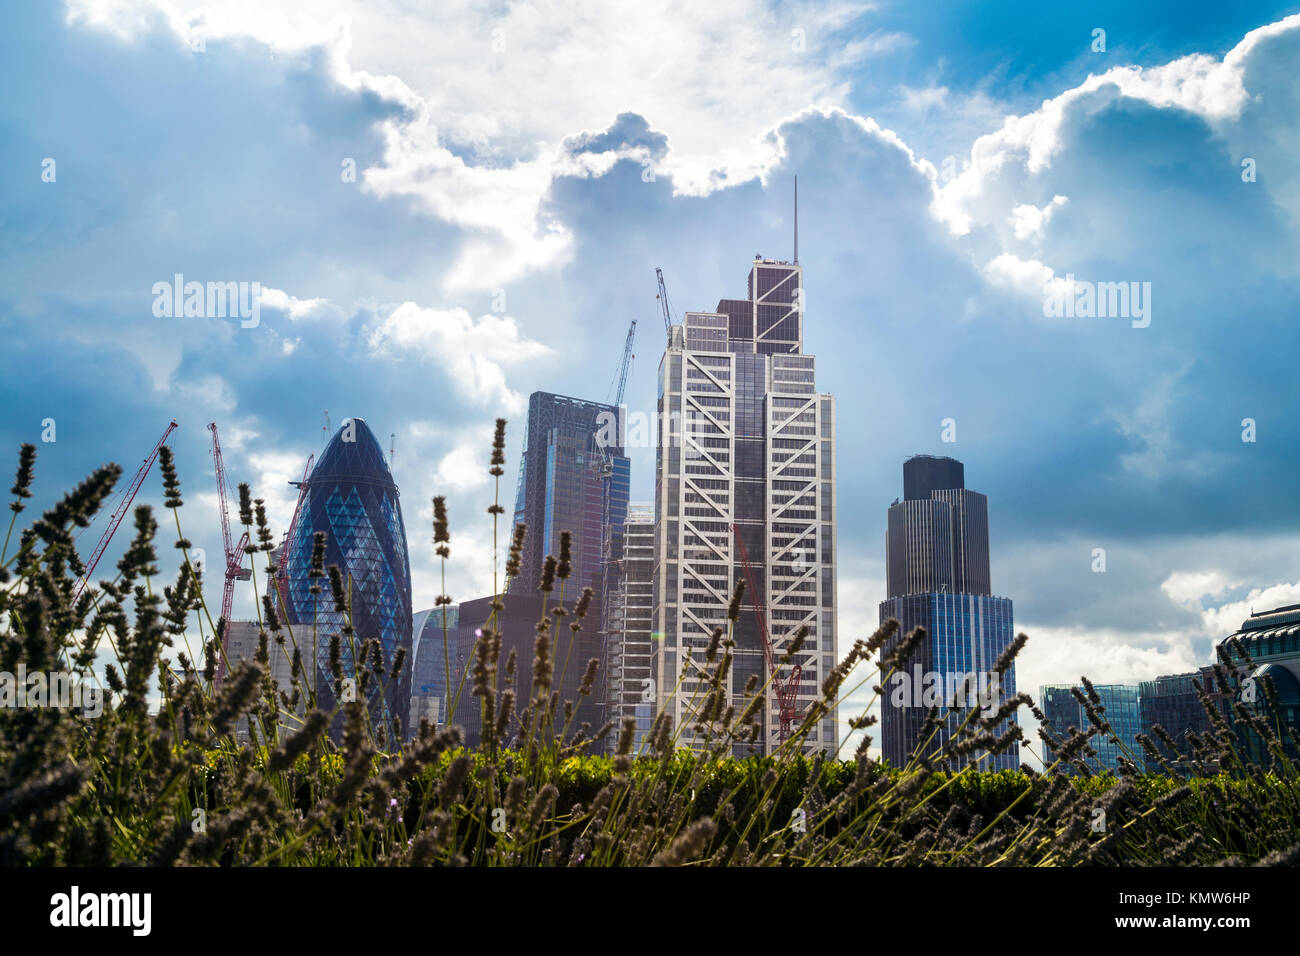 View of the City of London skyscrapers (Gherkin, Cheesegrater, Heron Tower, Tower 42) with plants and grass in foreground, London, UK Stock Photo